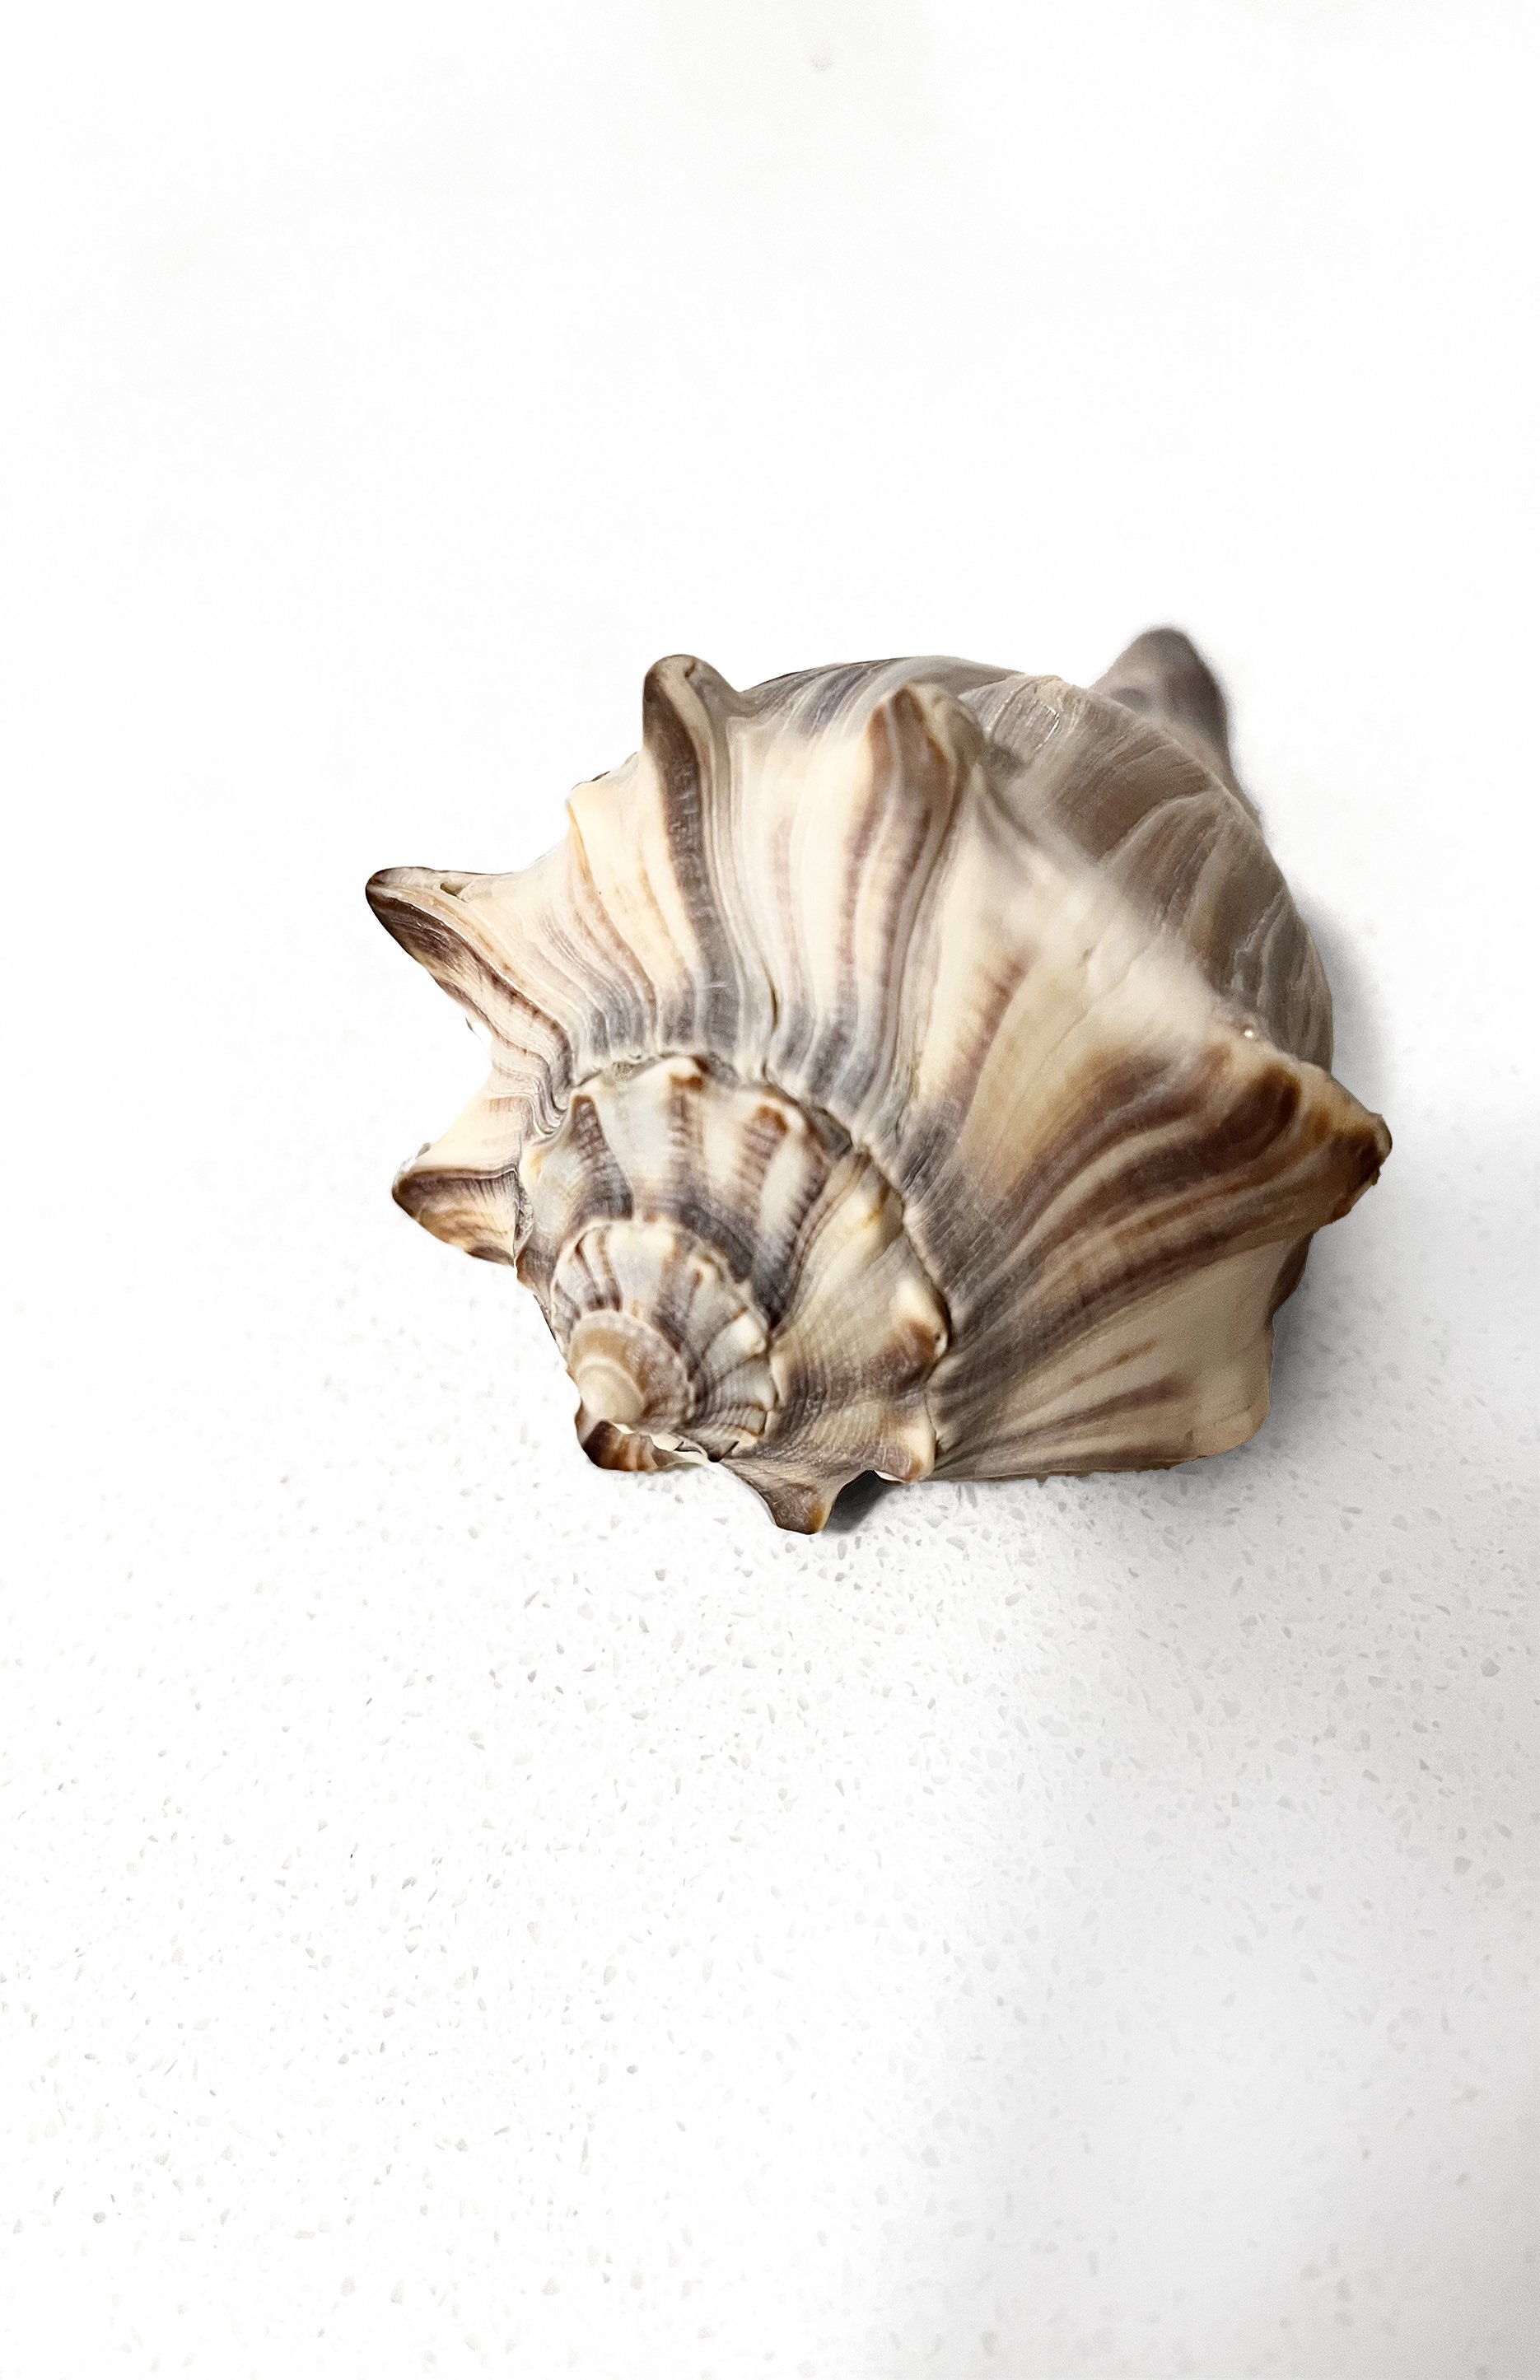    A Sea Shell   ~ Katie Flores  